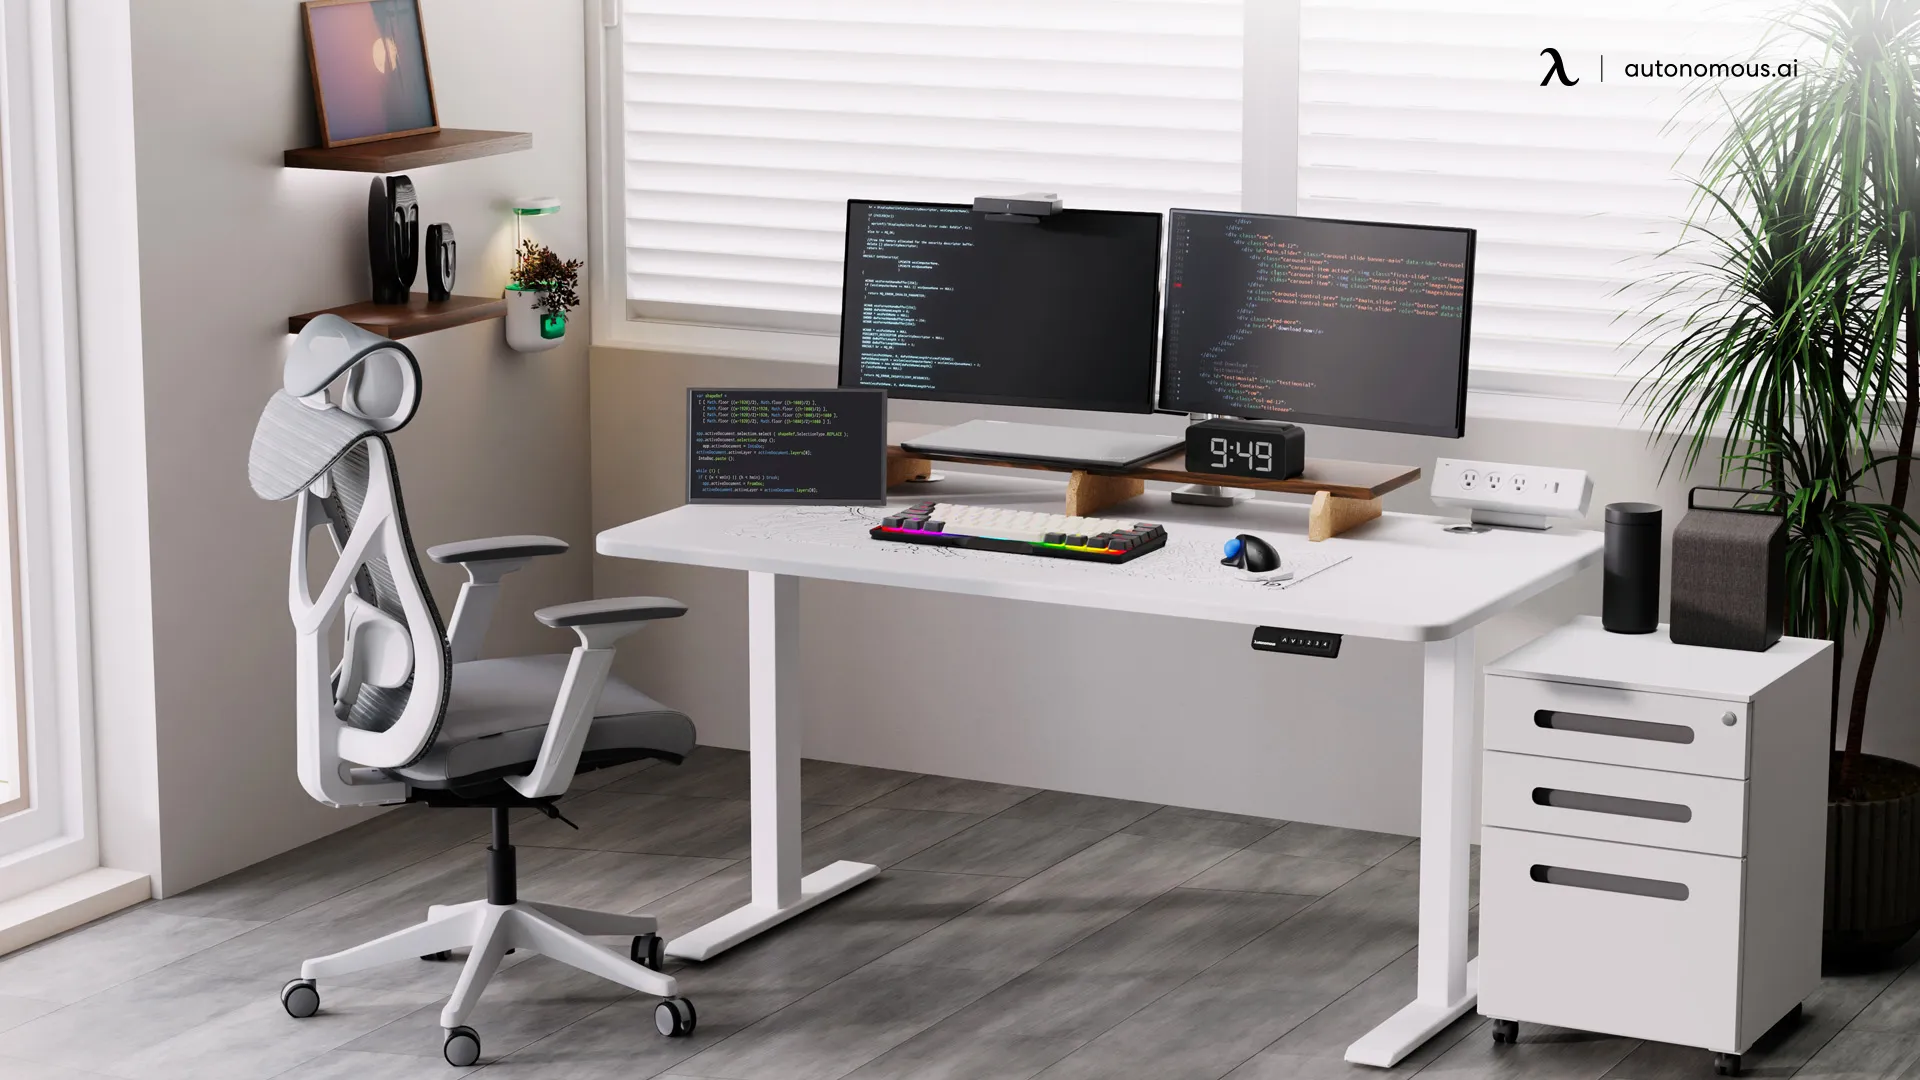 Buying an Ergonomic Chair for Home in UAE: Buyer’s Guide and Top Picks